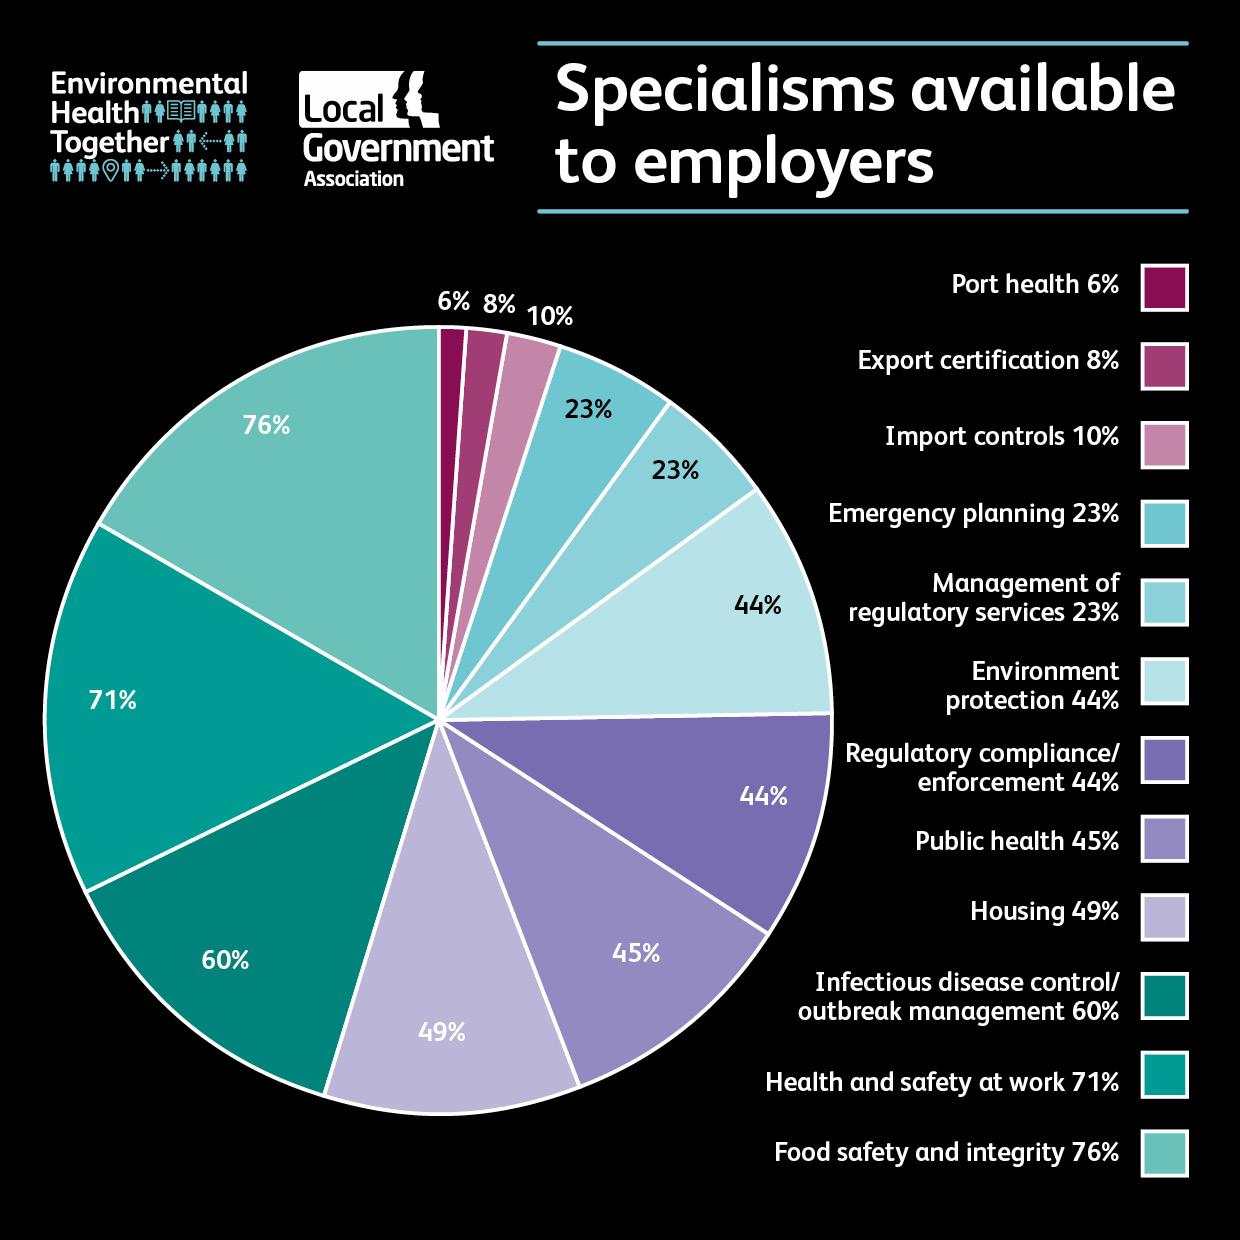 Pie chart showing percentage distribution of specialisms available within the EHT register for Councils